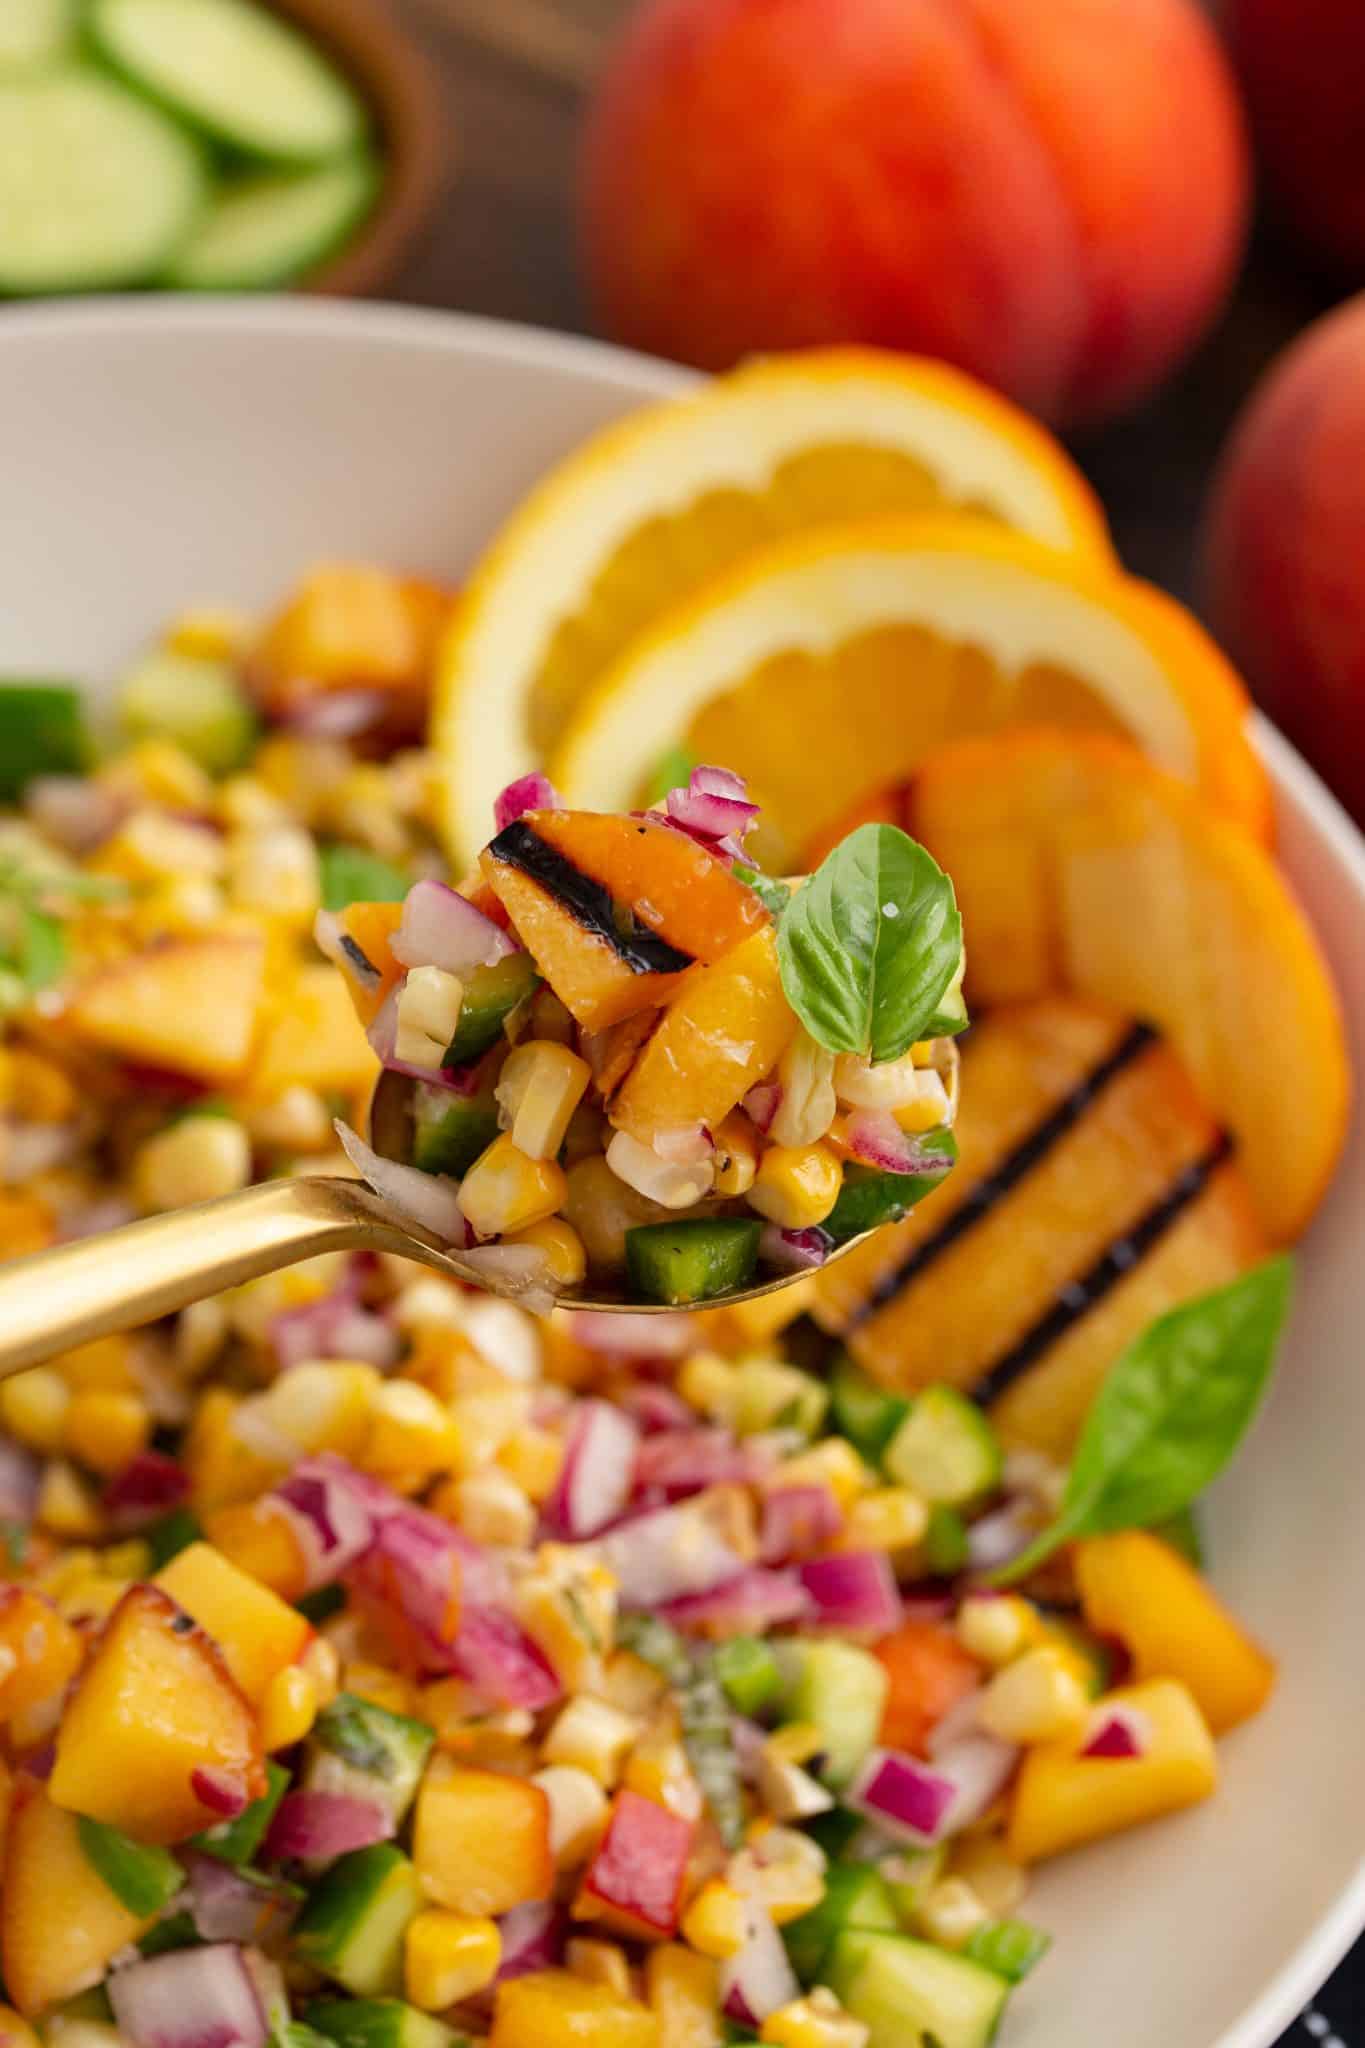 A spoonful of salad with grilled peaches, corn, red onions, cucumbers, and basil shown over a bowl of the same salad. Slices of orange and whole peaches are in the background.